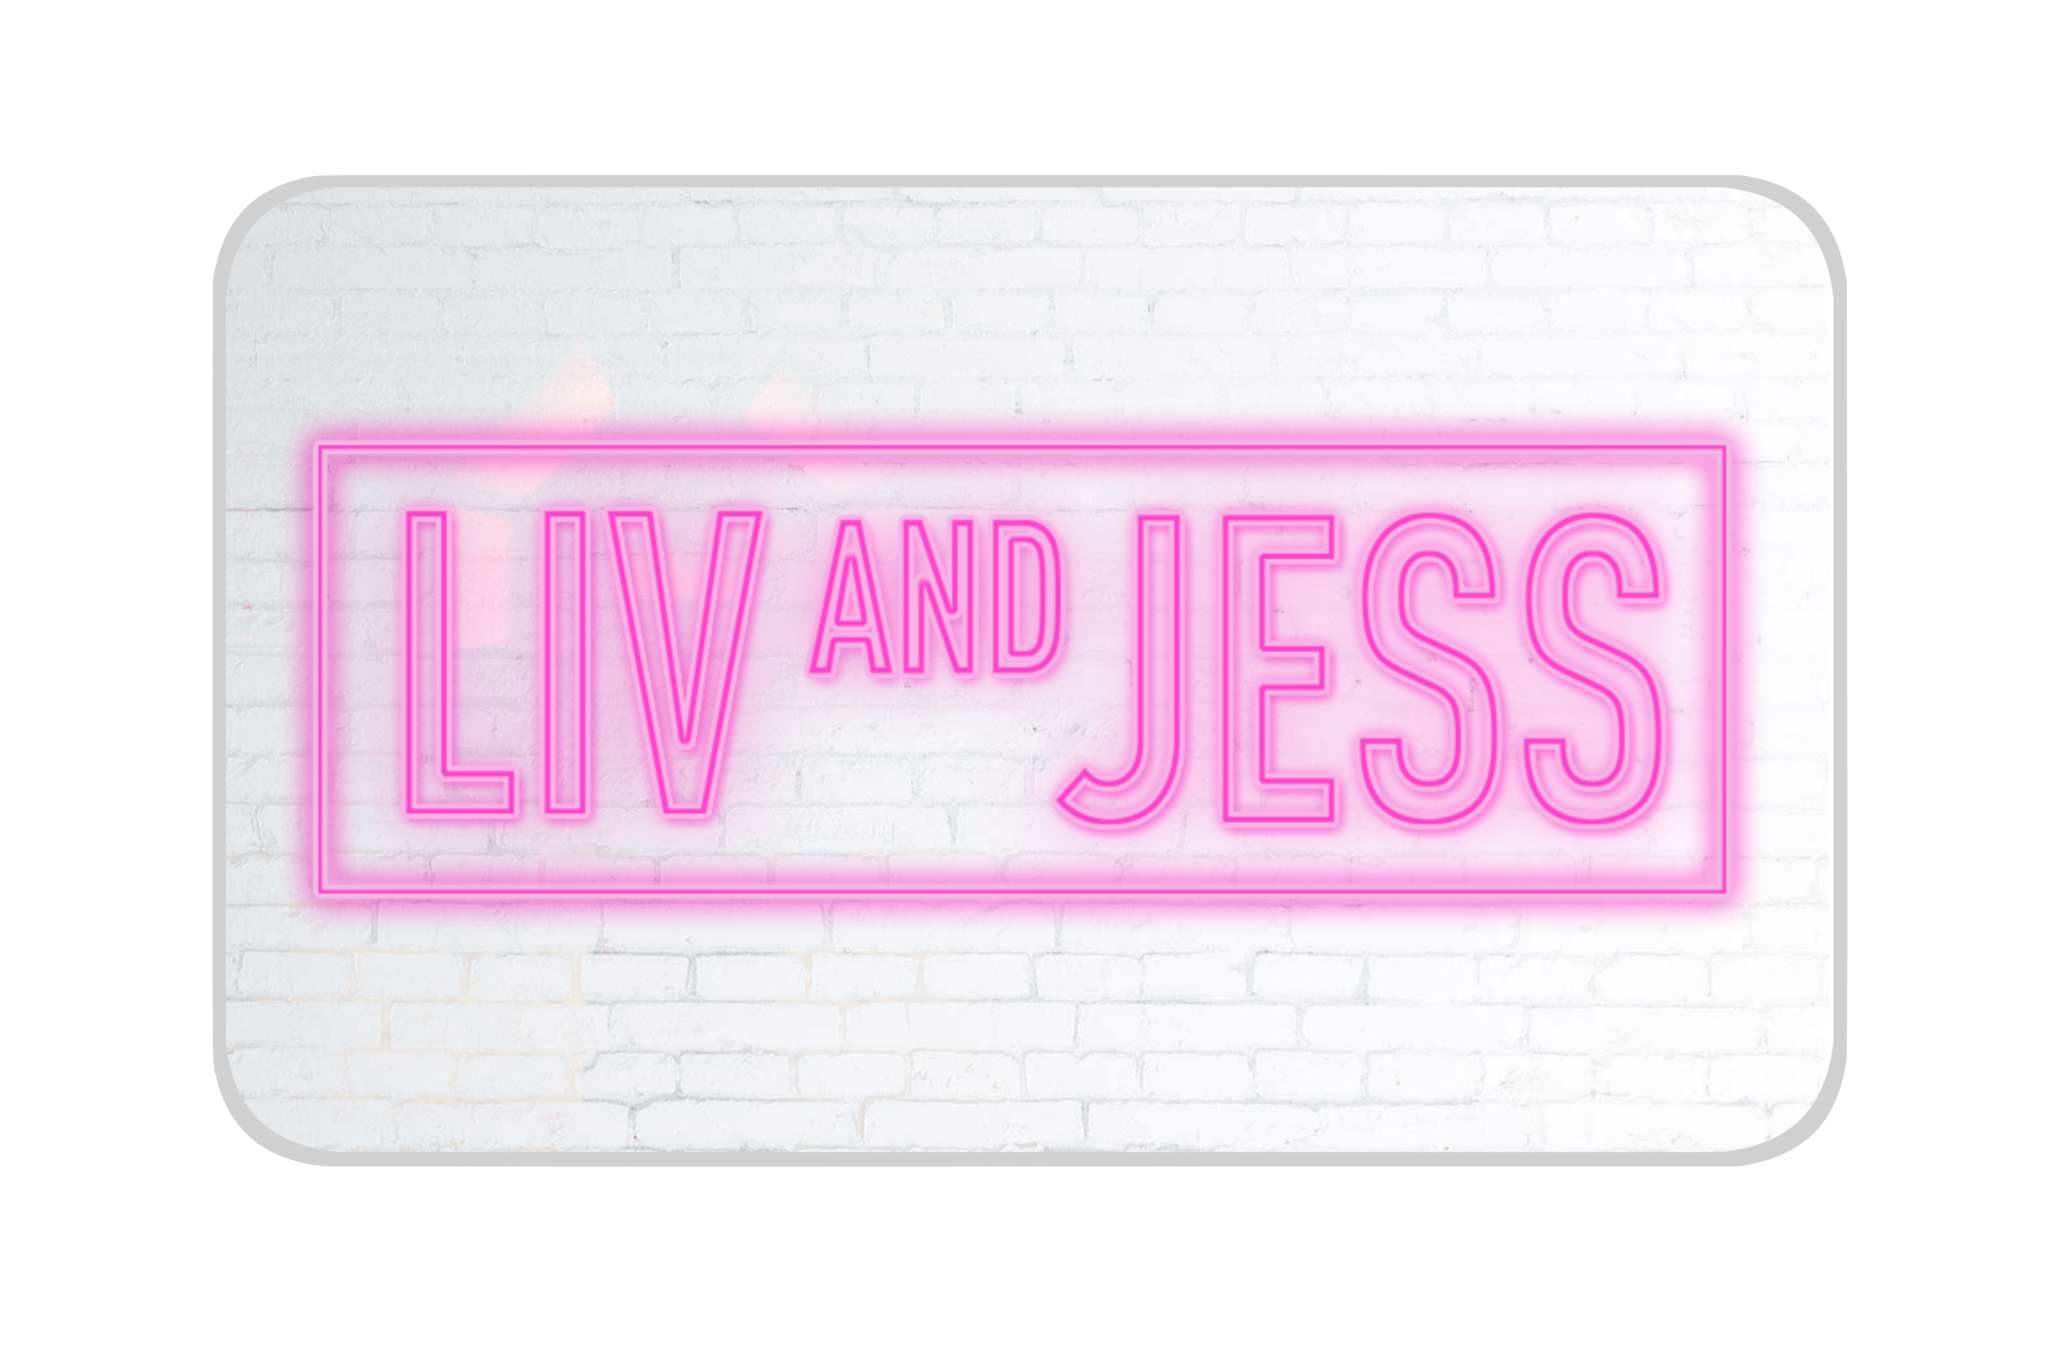 LIV AND JESS GIFT CARD